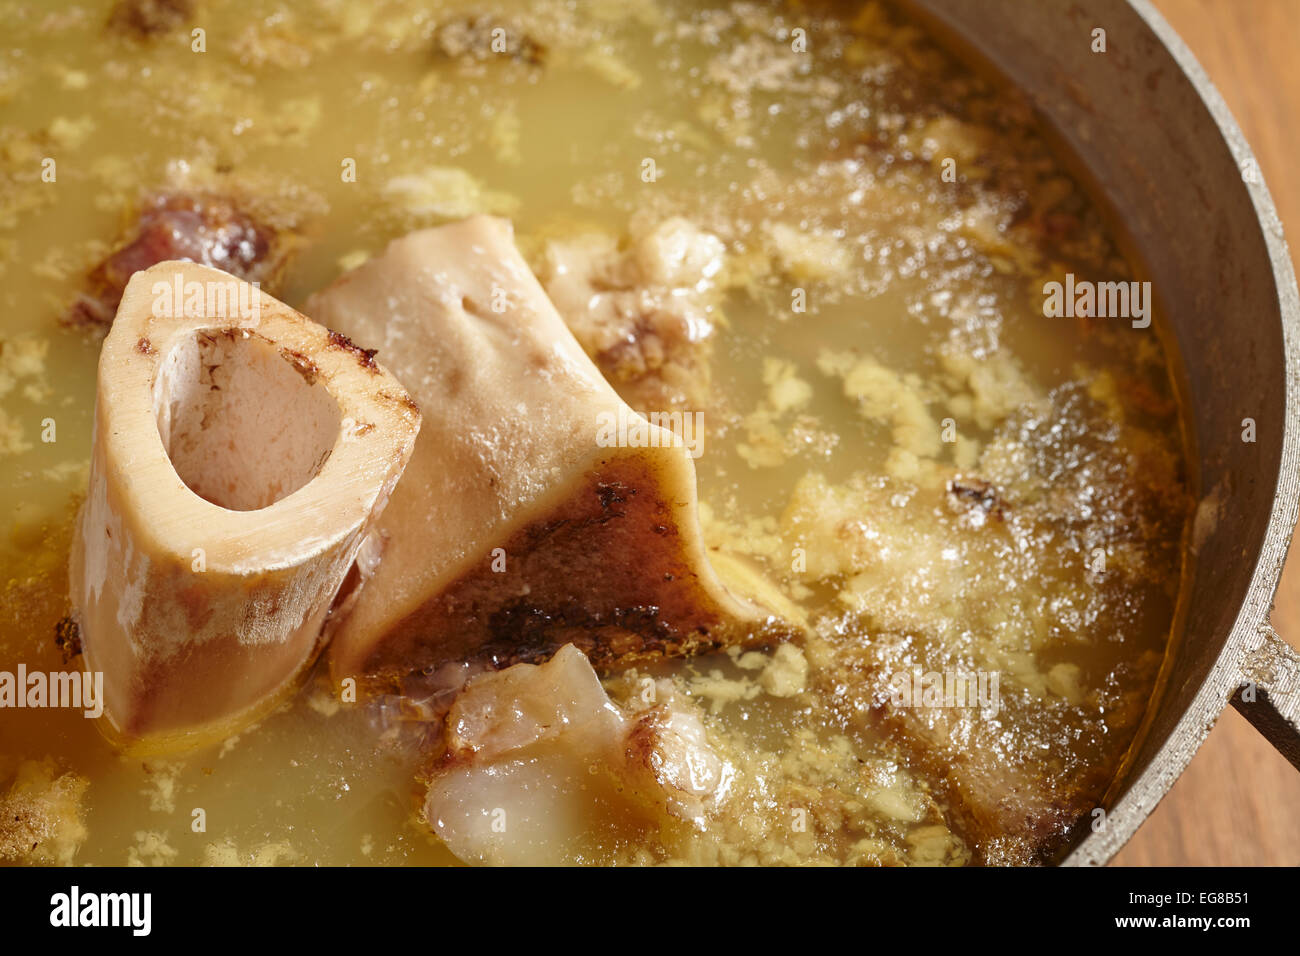 Pot of partially cooked beef bone broth Stock Photo